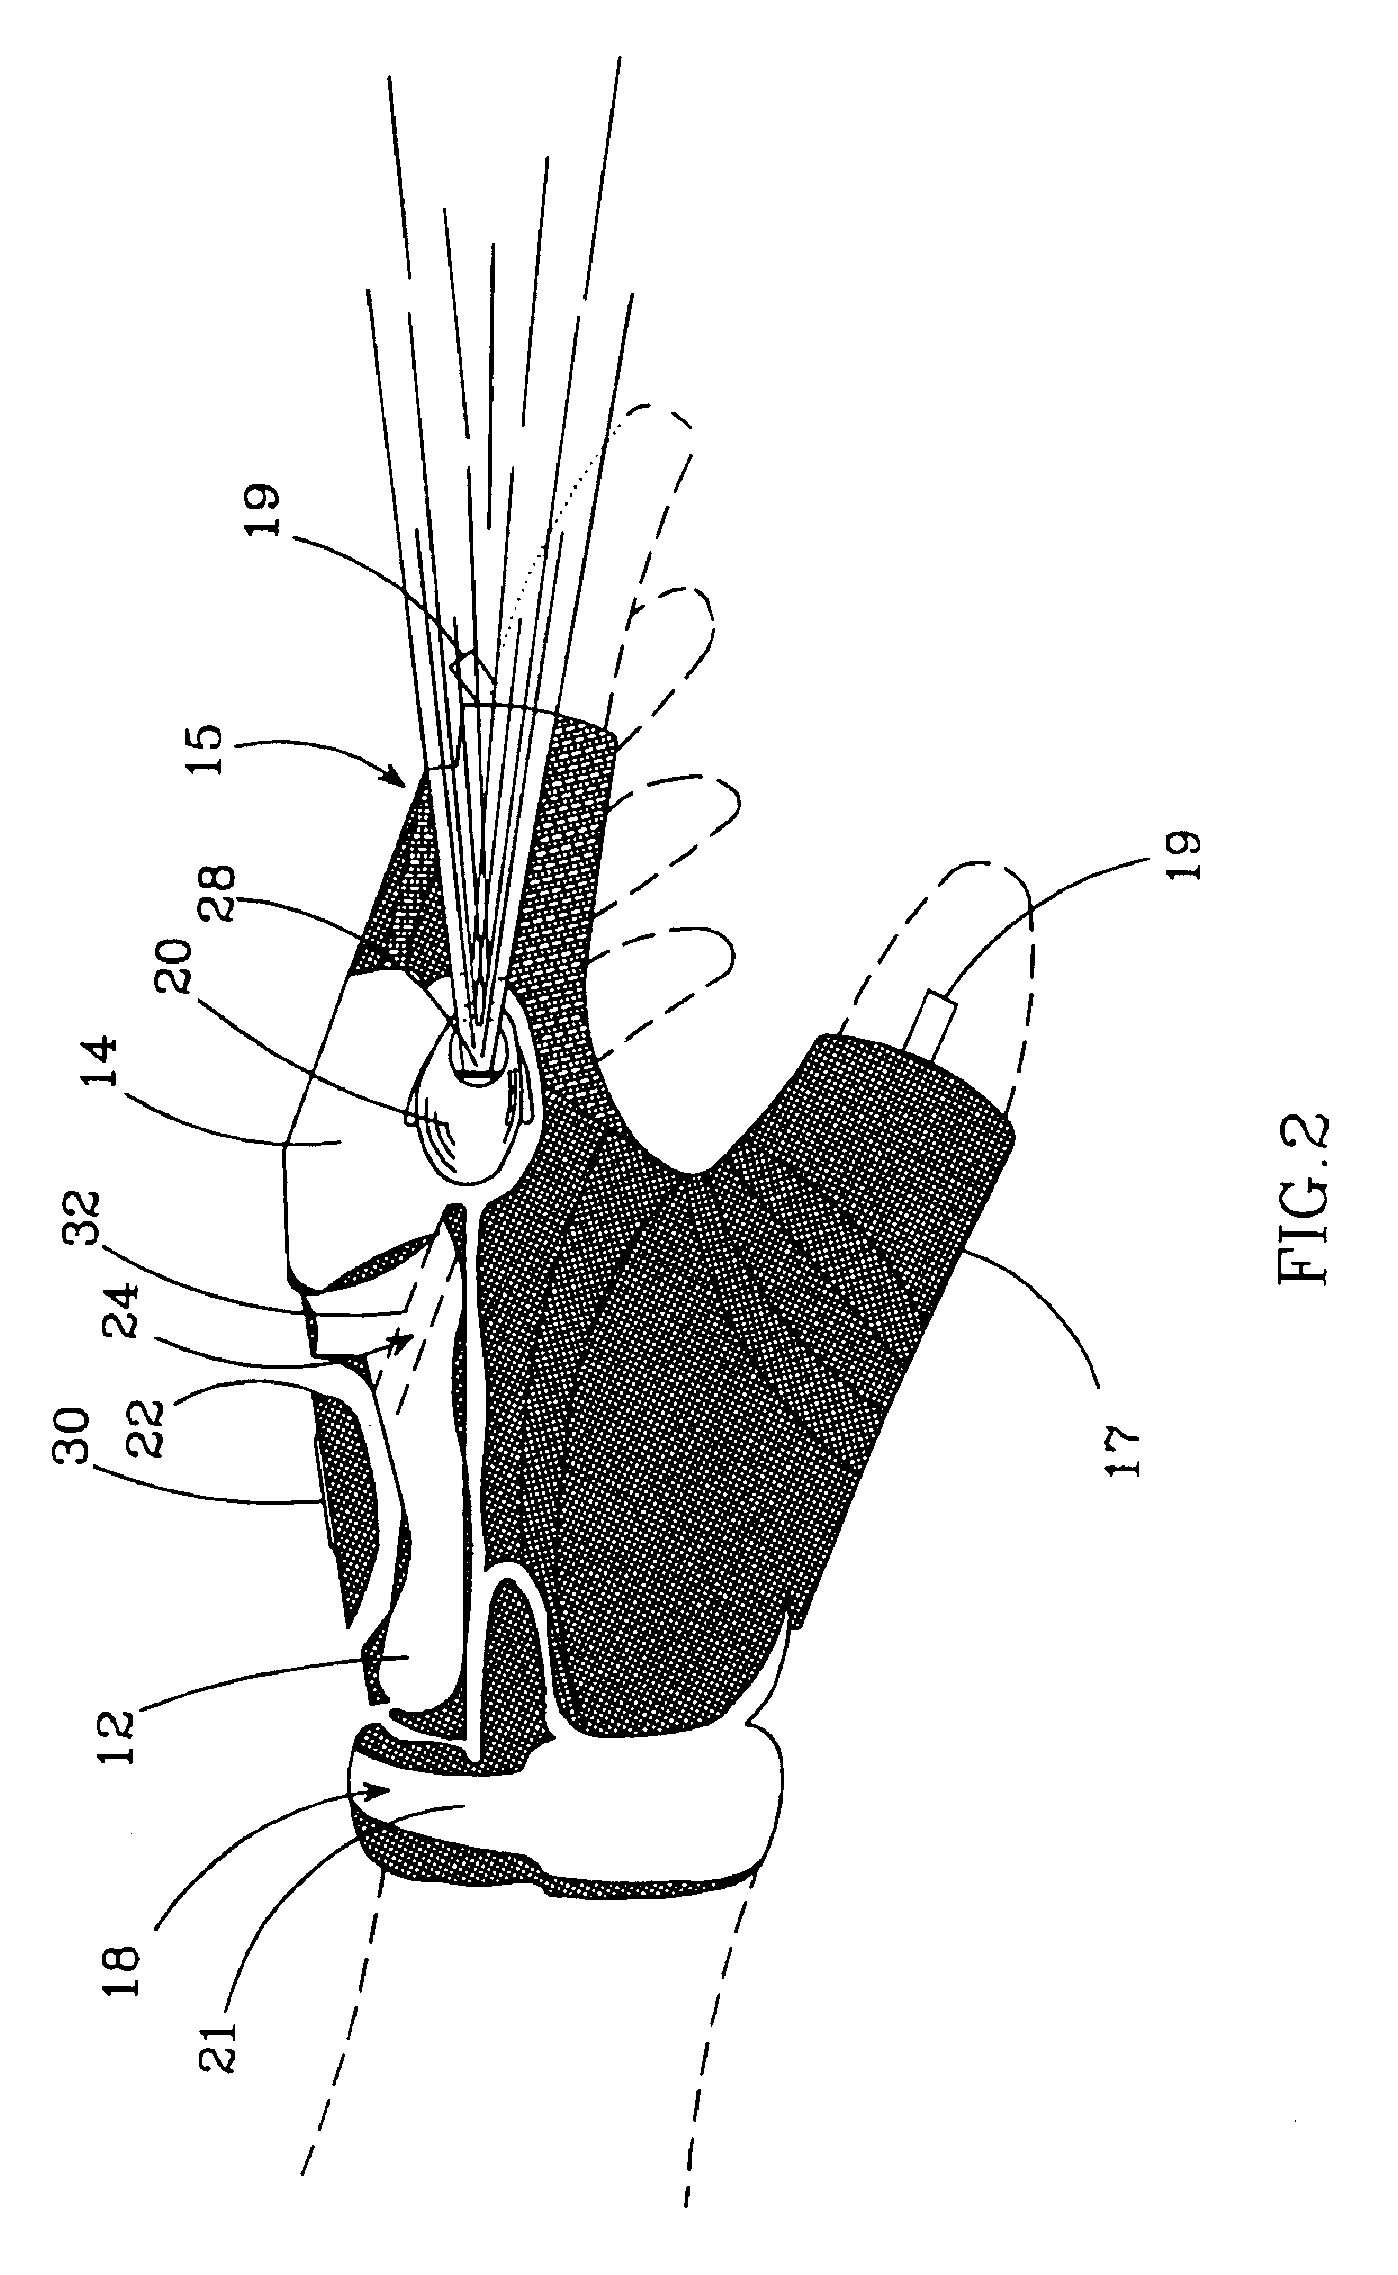 Glove with integrated light